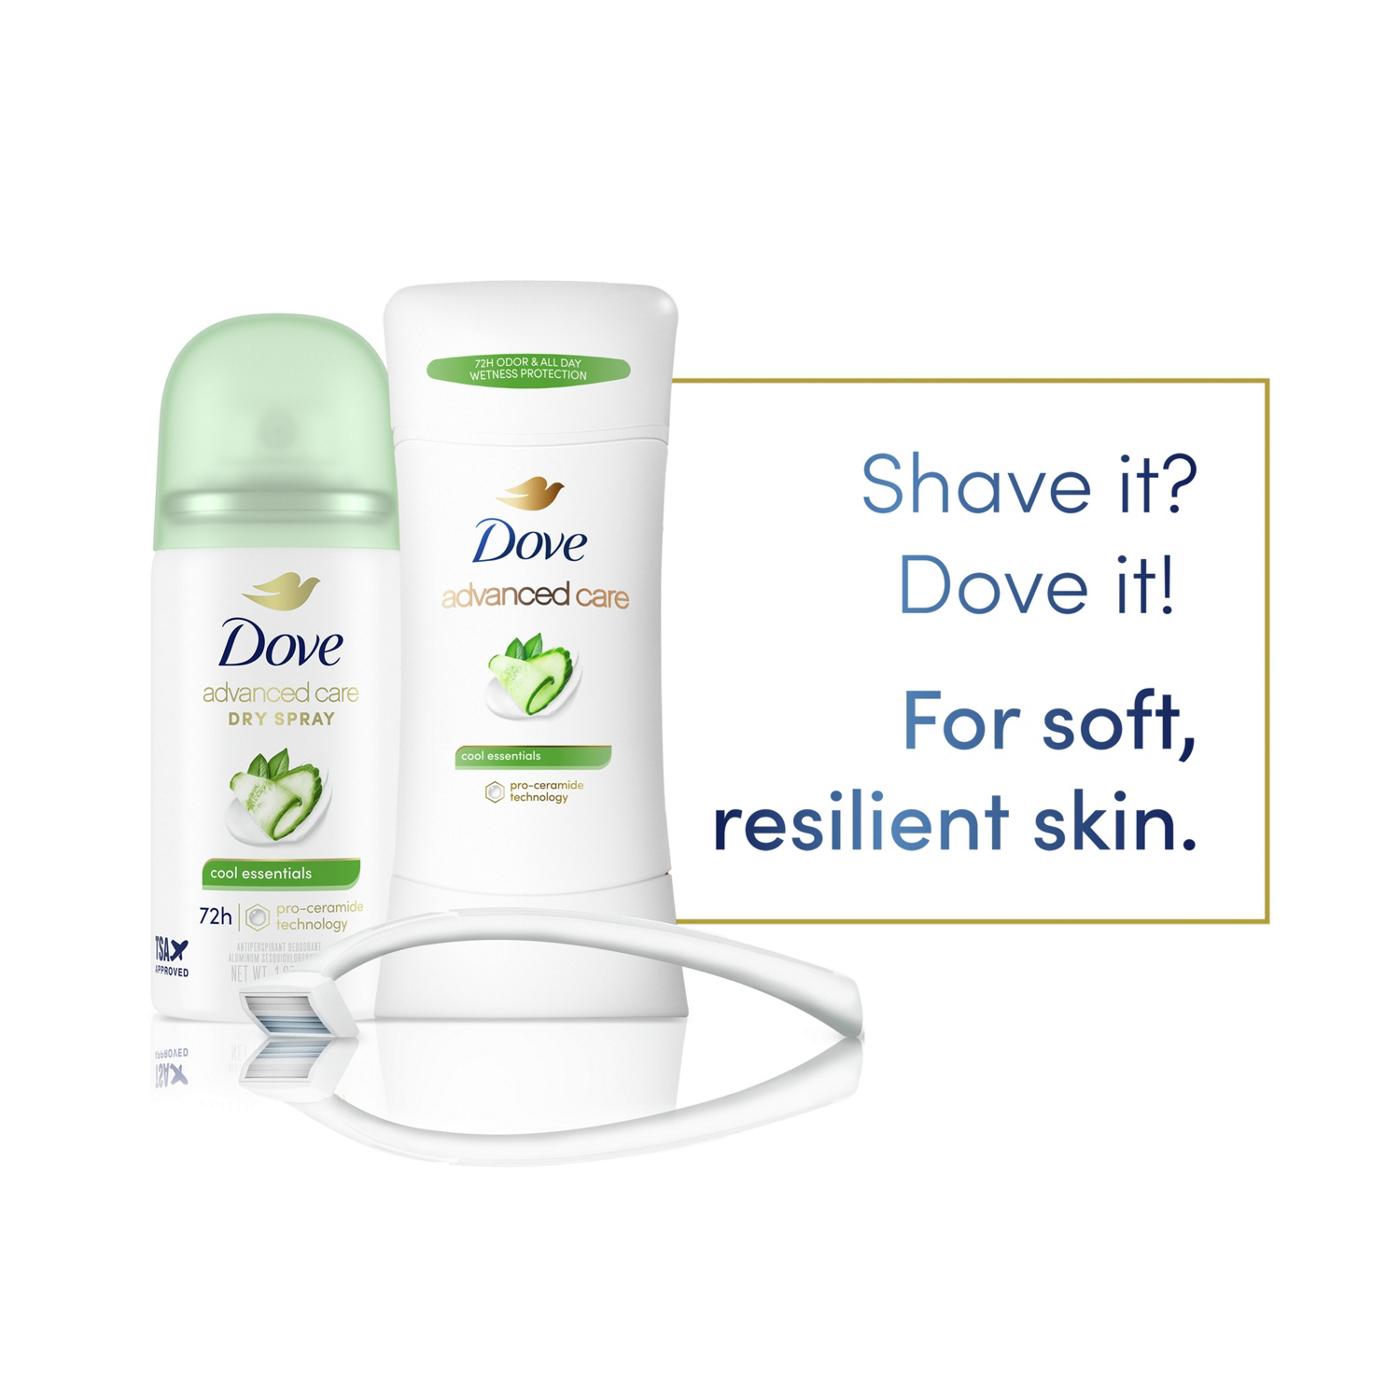 Dove Advanced Care Travel Size Deodorant Spry - Cool Essentials; image 9 of 9